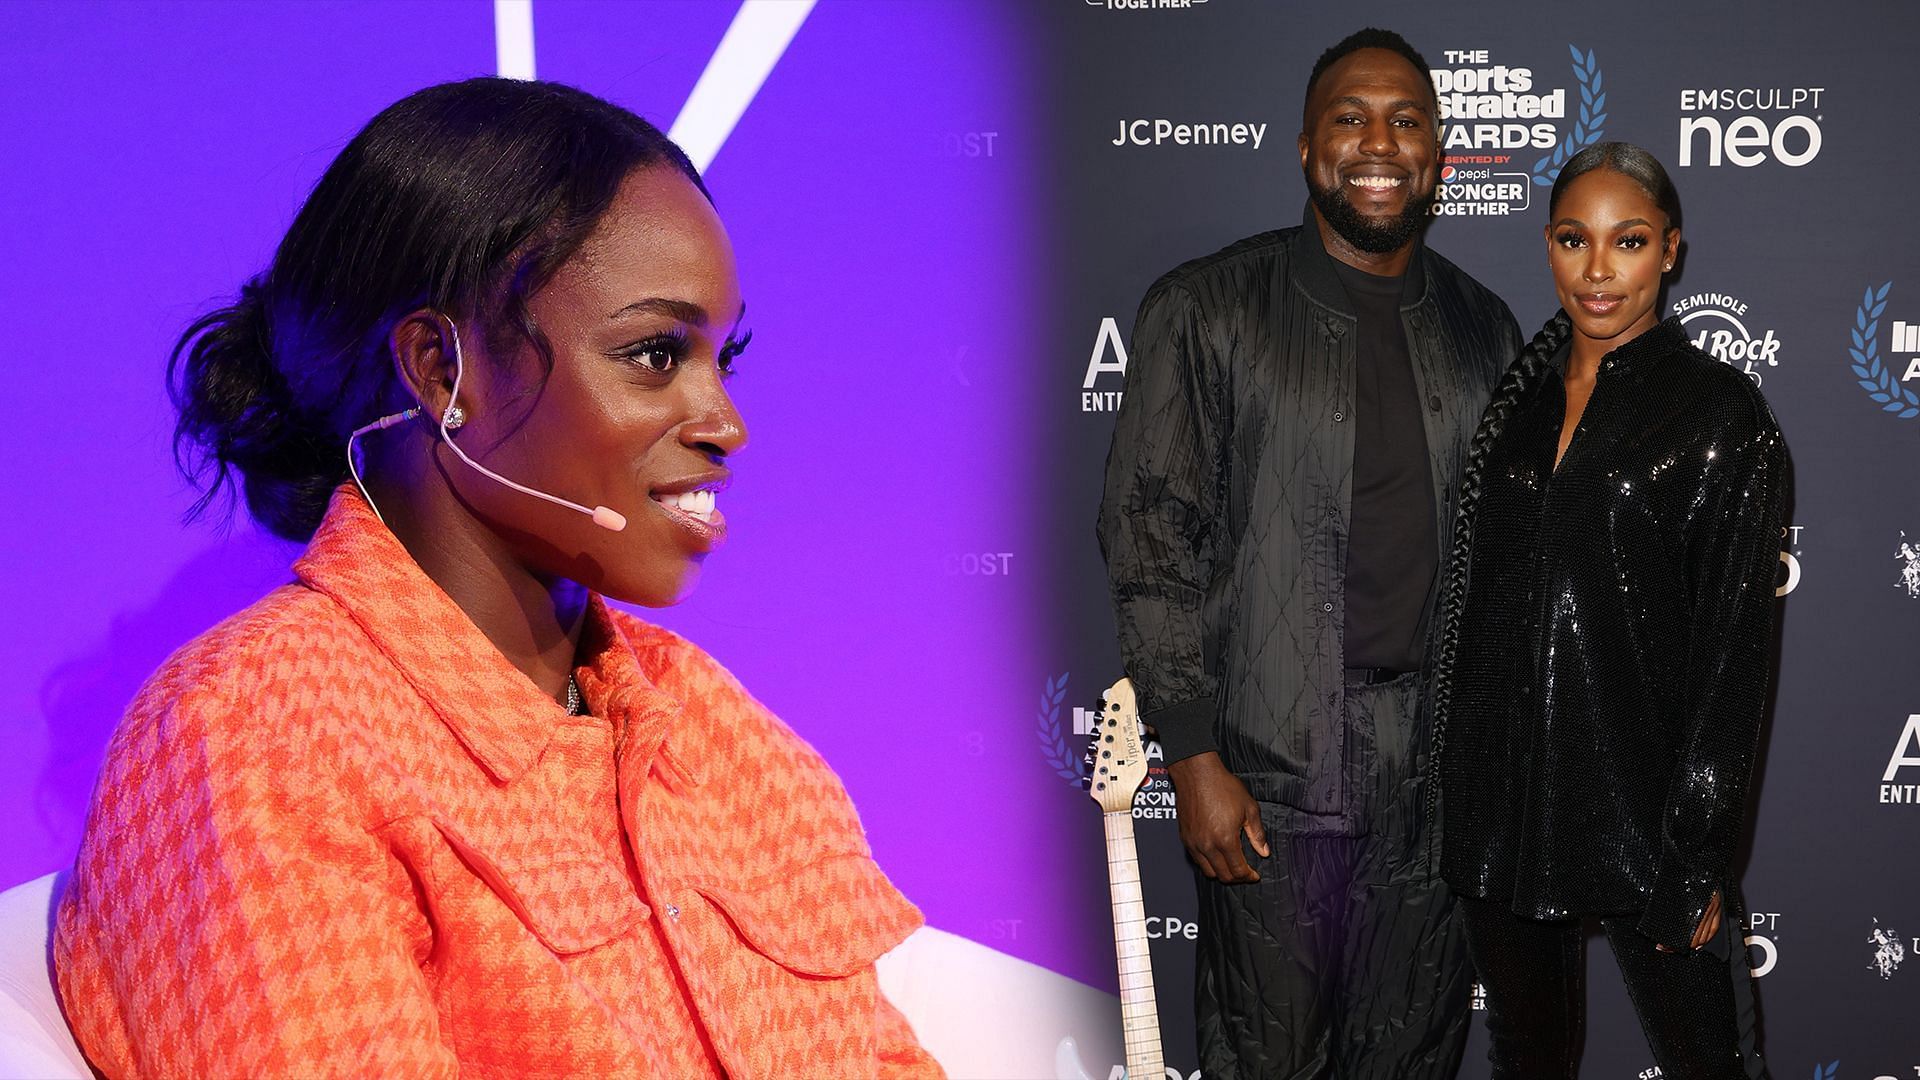 Sloane Stephens shares what she likes most about her husband Jozy Altidore, her first experience at a UFC fight and more